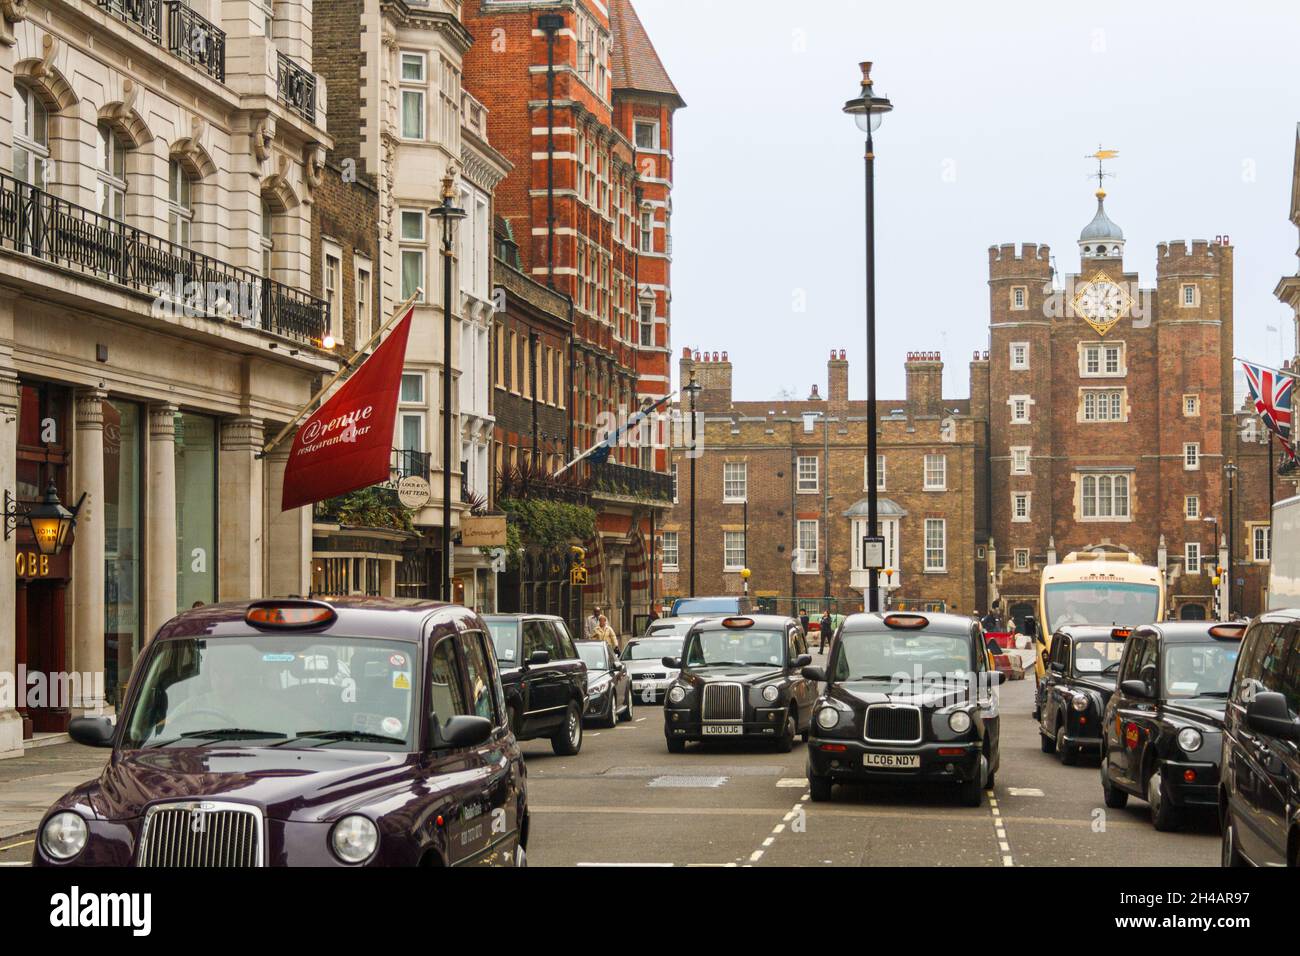 London, United Kingdom; March 15th 2011: Taxis on Saint James Street, with the palace of the same name in the background. Stock Photo